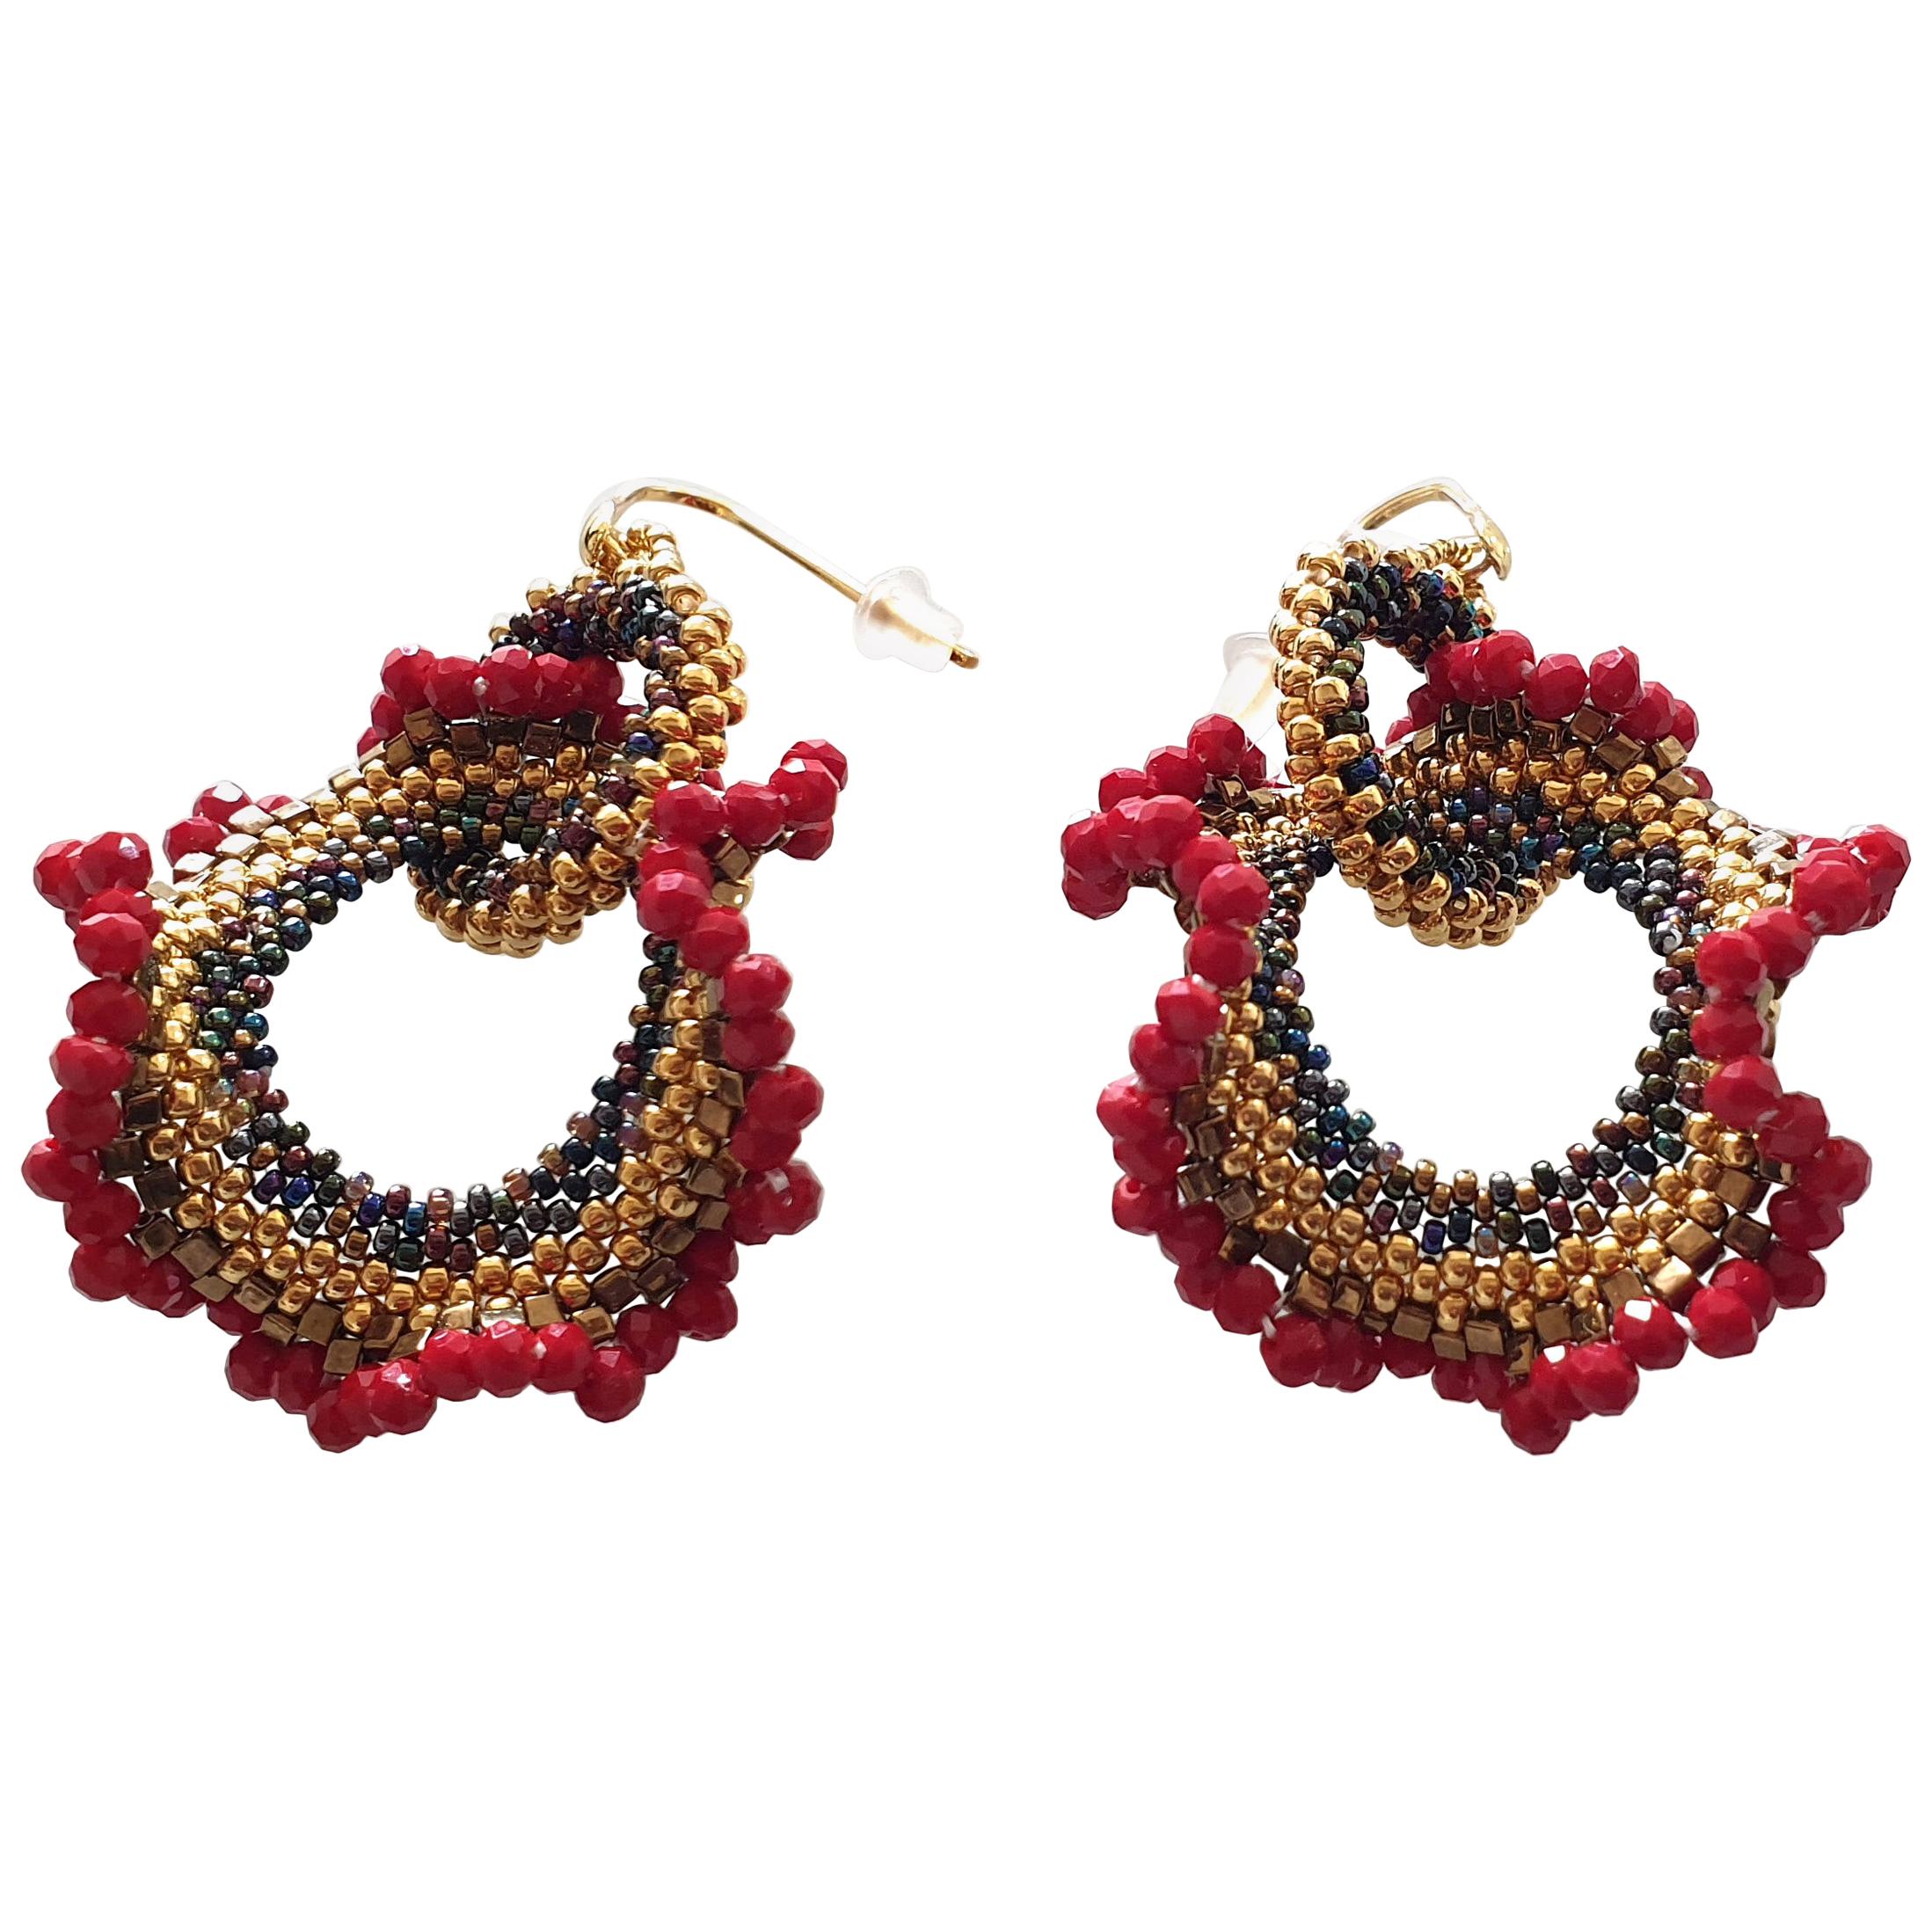 Pair drop earrings hand made in red & gold Murano glass beads by artist Paola B.